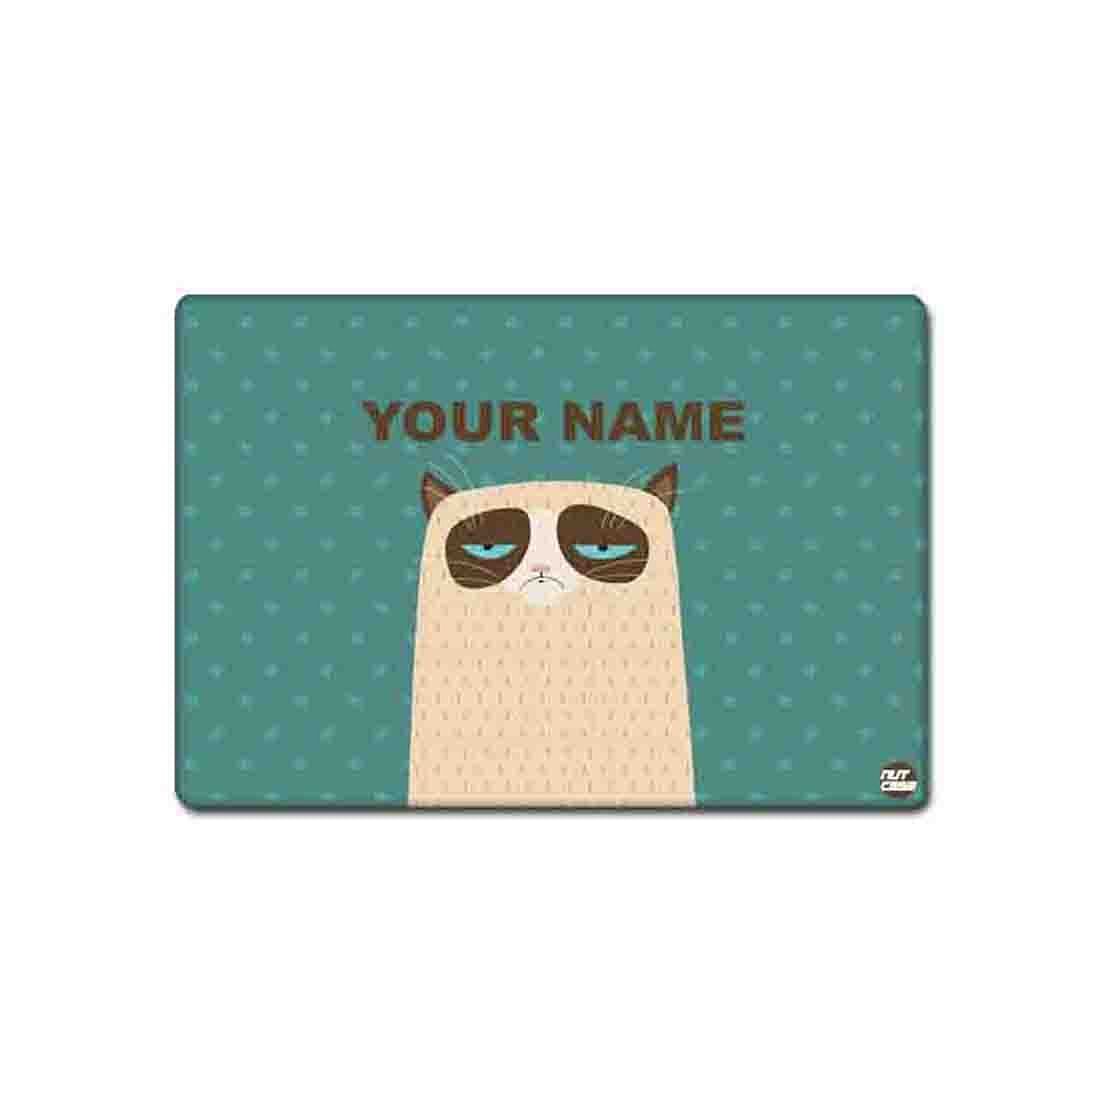 Personalized Fabric Table Mats For Kids - Polar Bear Nutcase